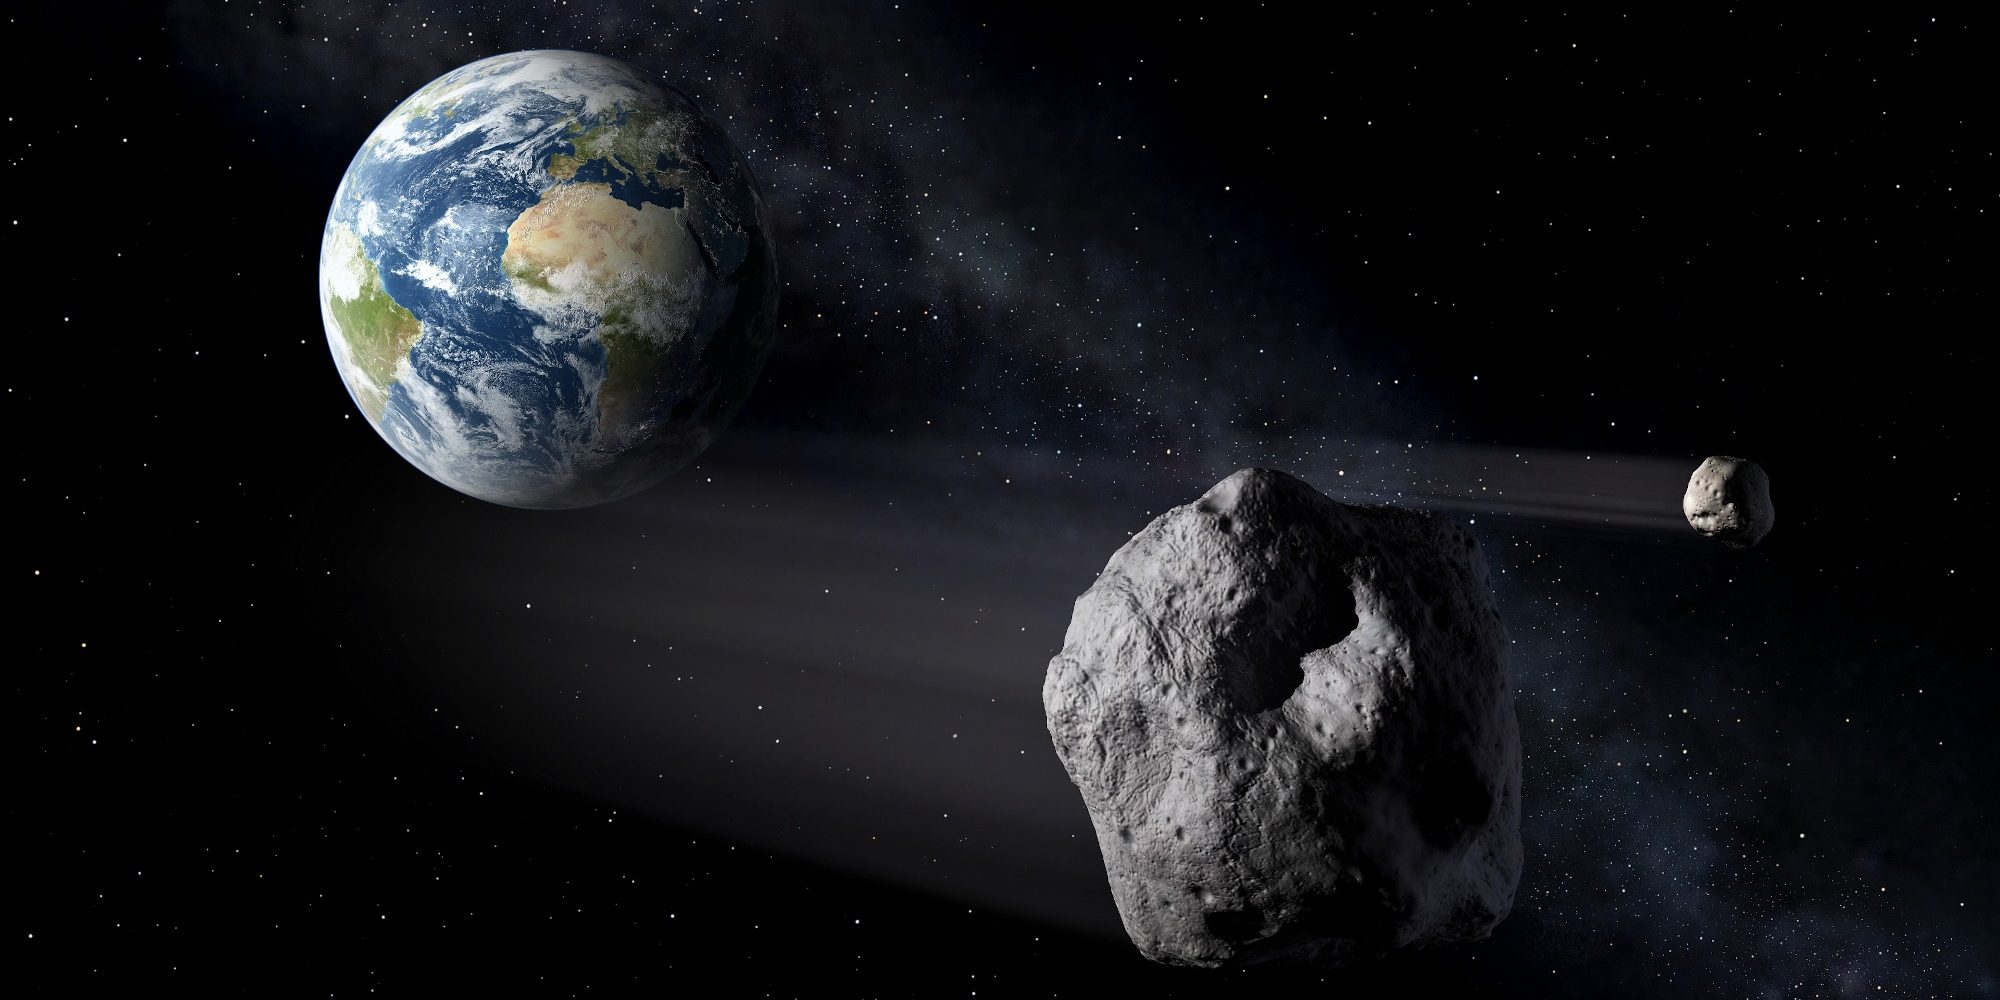 Near Earth Asteroids and Earth